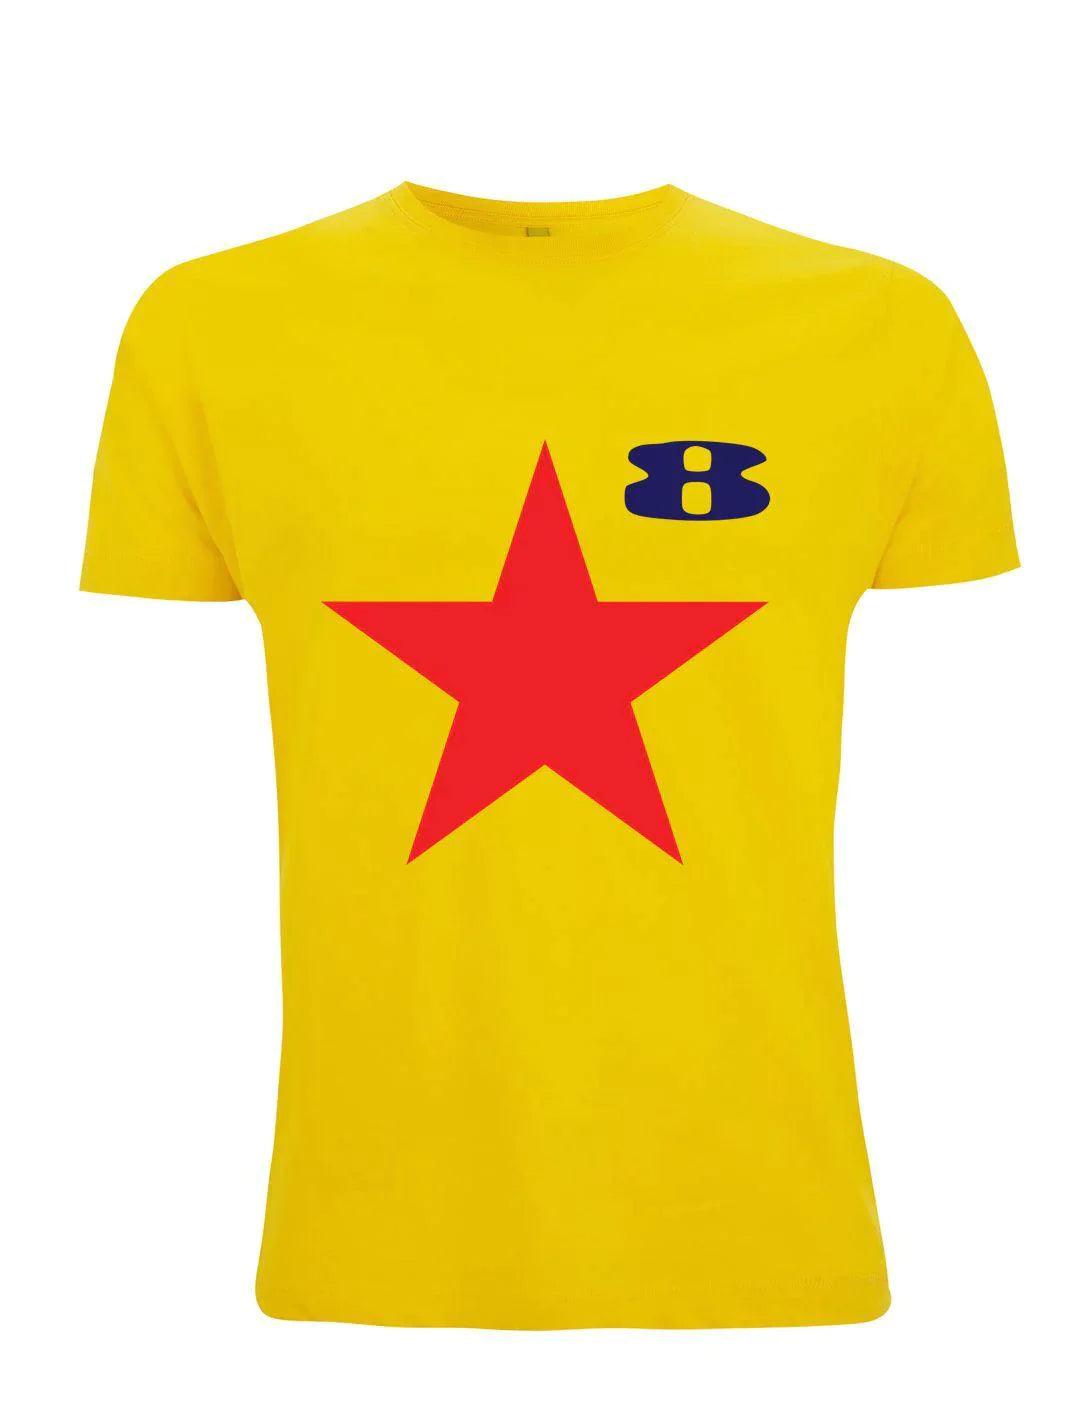 paul weller stanley road inspired t-shirts and sweatshirts quality red star on yellow by sound is colour